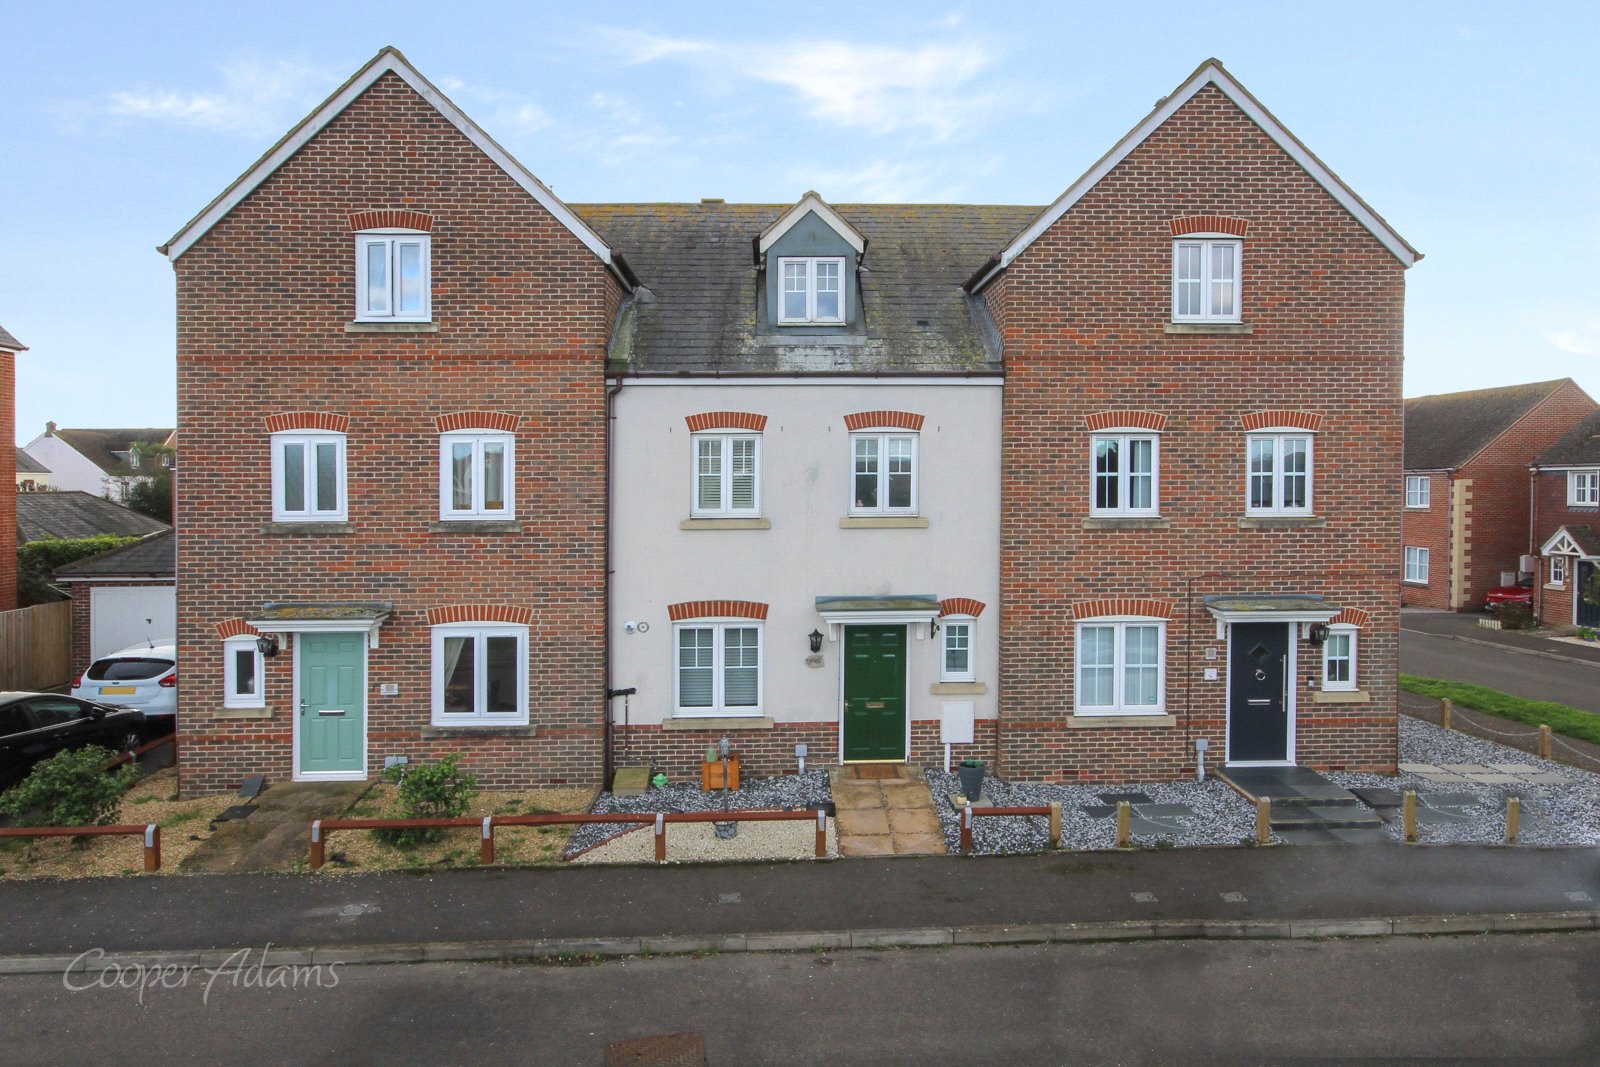 Foxwood Avenue, Angmering, a success story (Ref: ANG 170289)